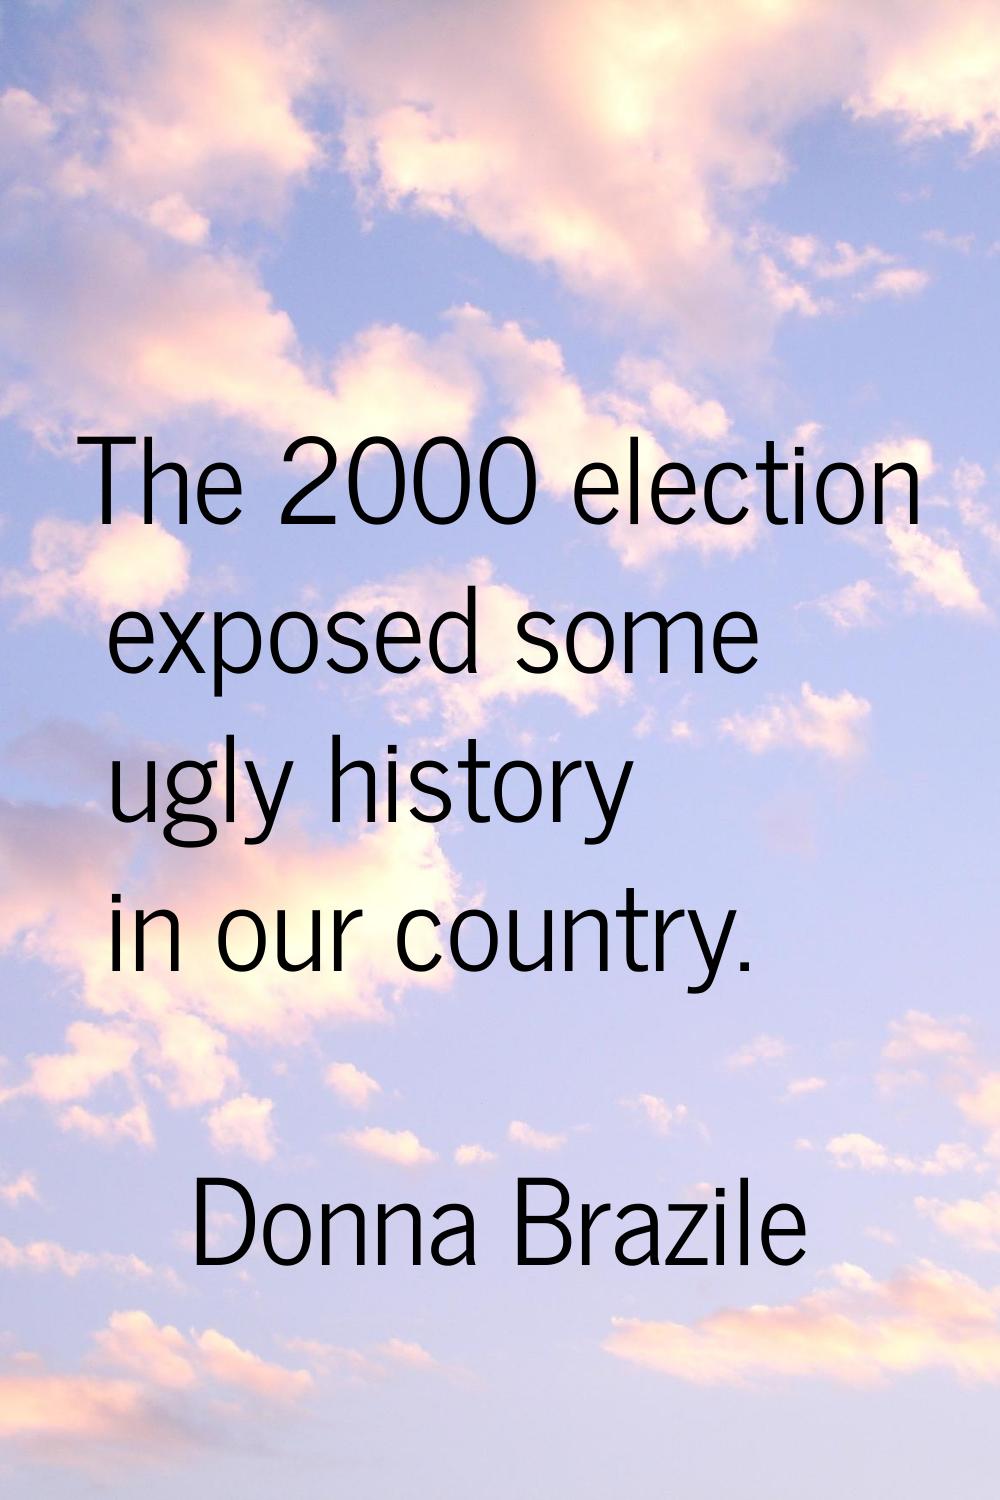 The 2000 election exposed some ugly history in our country.